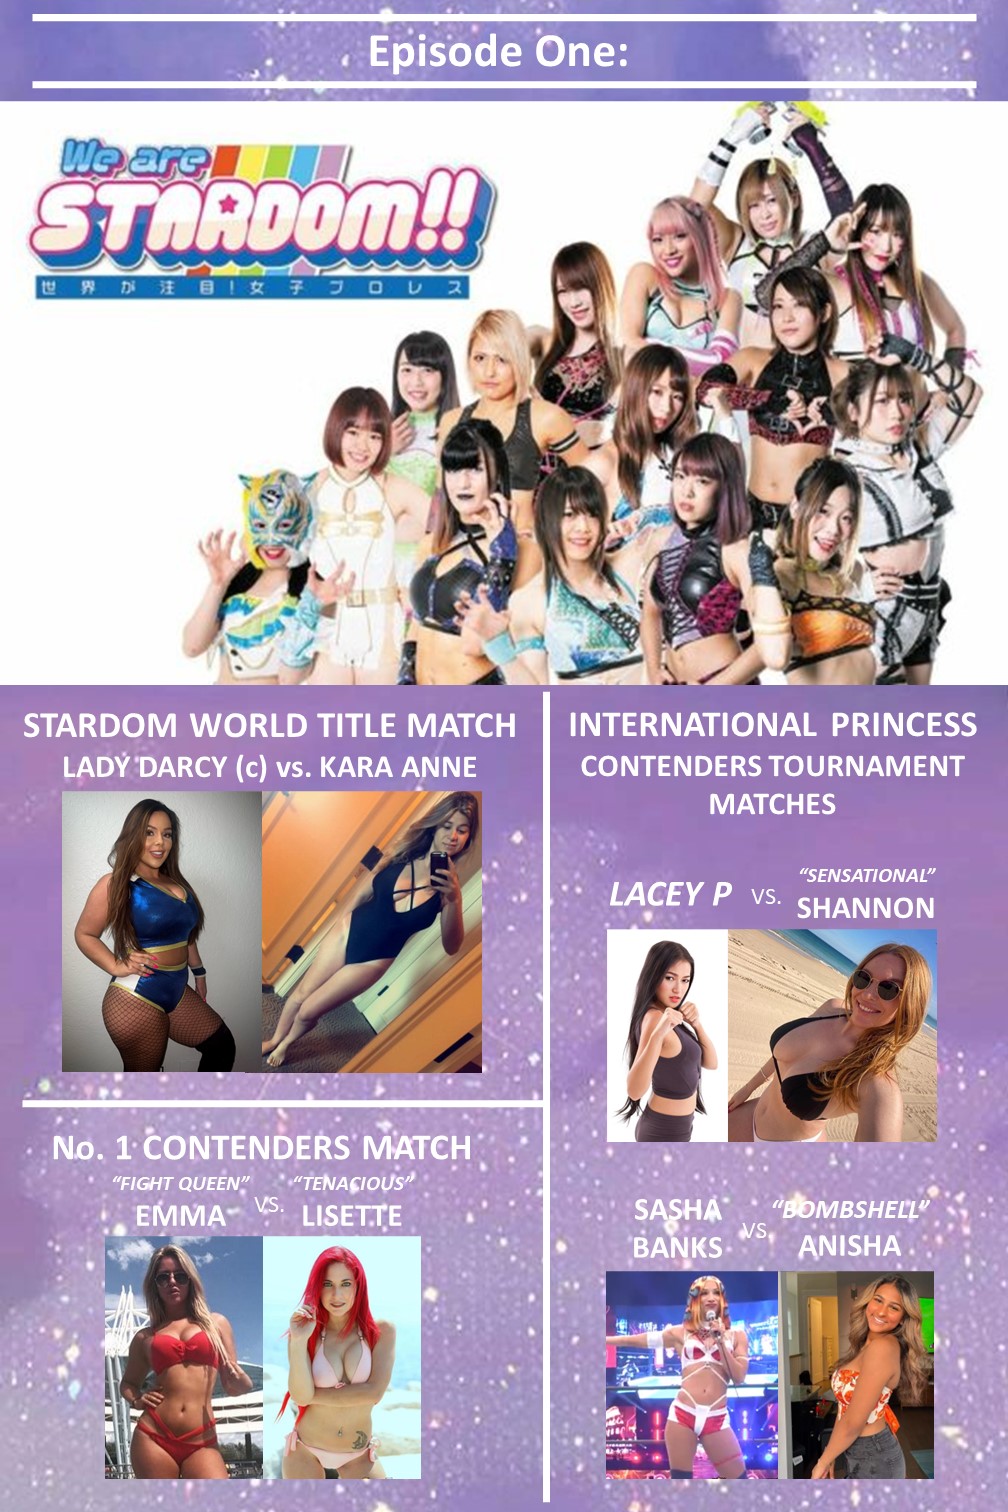 [IMAGE:https://venus.chatfighters.com/Content/Attachments/5E/5ERy1afZl8Ha4bsOxUk0wQyKvlI.jpeg/We_are_Stardom_Episode_01.jpeg]